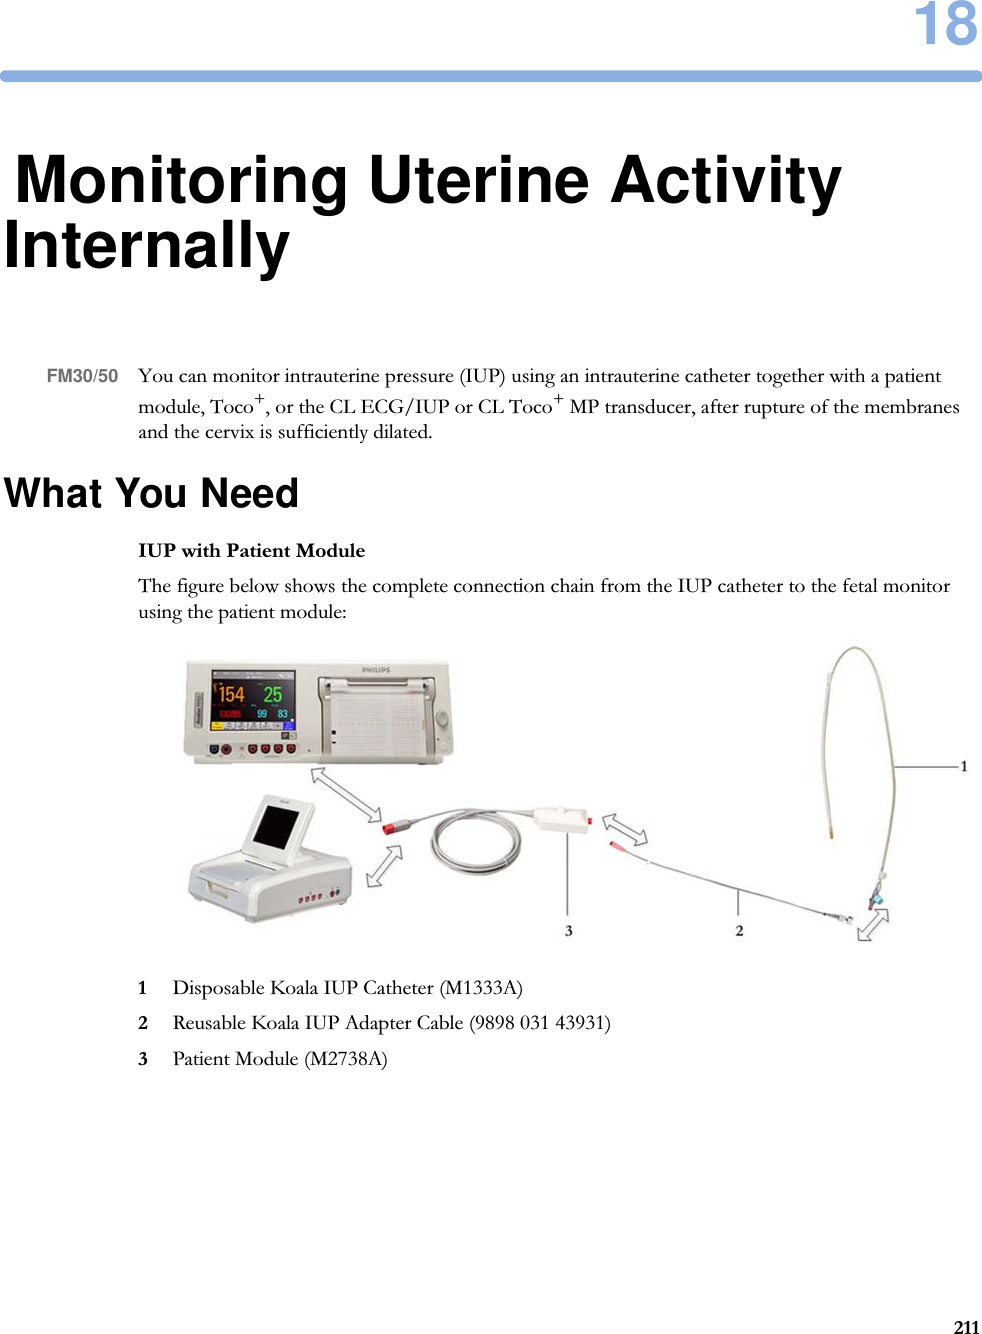 1821118Monitoring Uterine Activity InternallyFM30/50 You can monitor intrauterine pressure (IUP) using an intrauterine catheter together with a patient module, Toco+, or the CL ECG/IUP or CL Toco+ MP transducer, after rupture of the membranes and the cervix is sufficiently dilated.What You NeedIUP with Patient ModuleThe figure below shows the complete connection chain from the IUP catheter to the fetal monitor using the patient module:1Disposable Koala IUP Catheter (M1333A)2Reusable Koala IUP Adapter Cable (9898 031 43931)3Patient Module (M2738A)